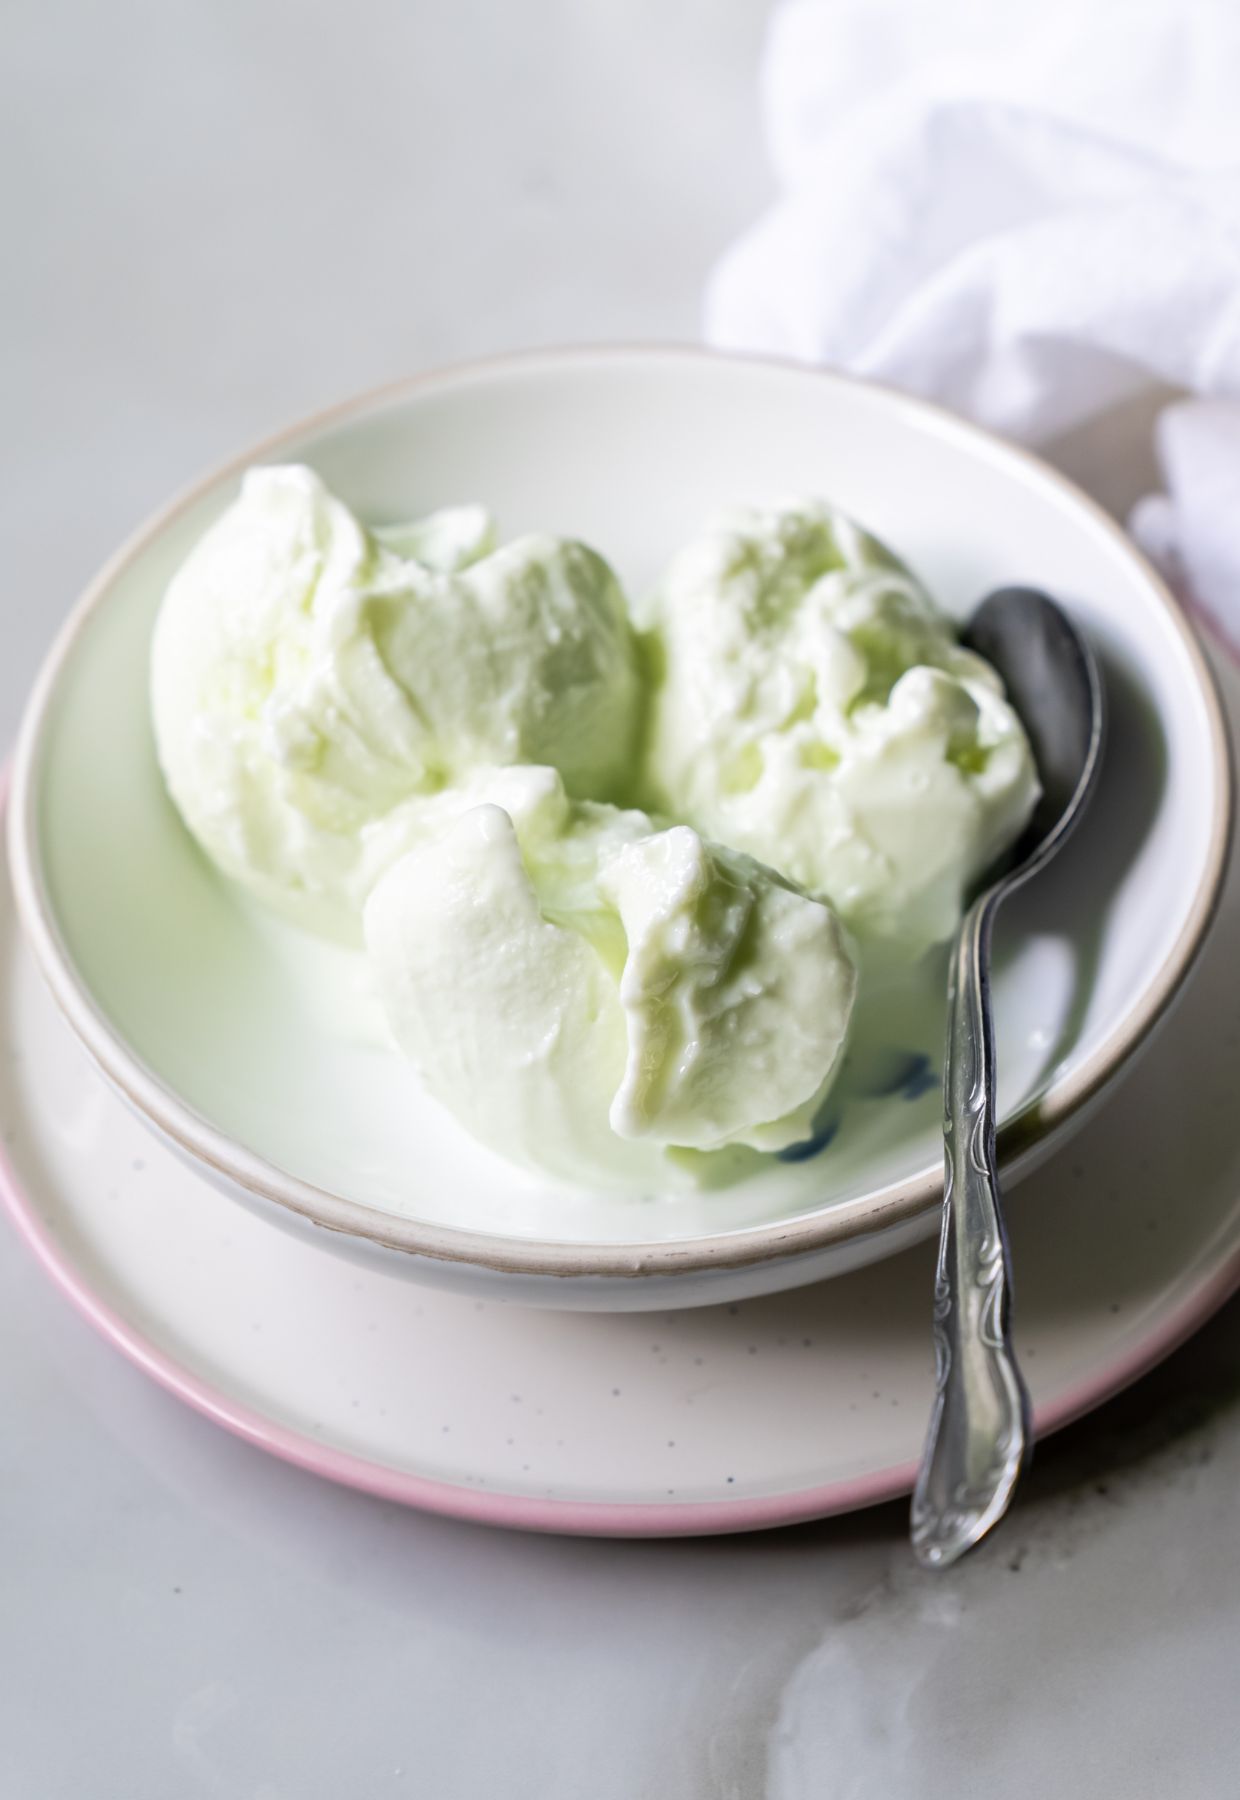 A bowl with three scoops of light green ice cream, a metal spoon, and a stack of two plates—a delightful dessert presentation.